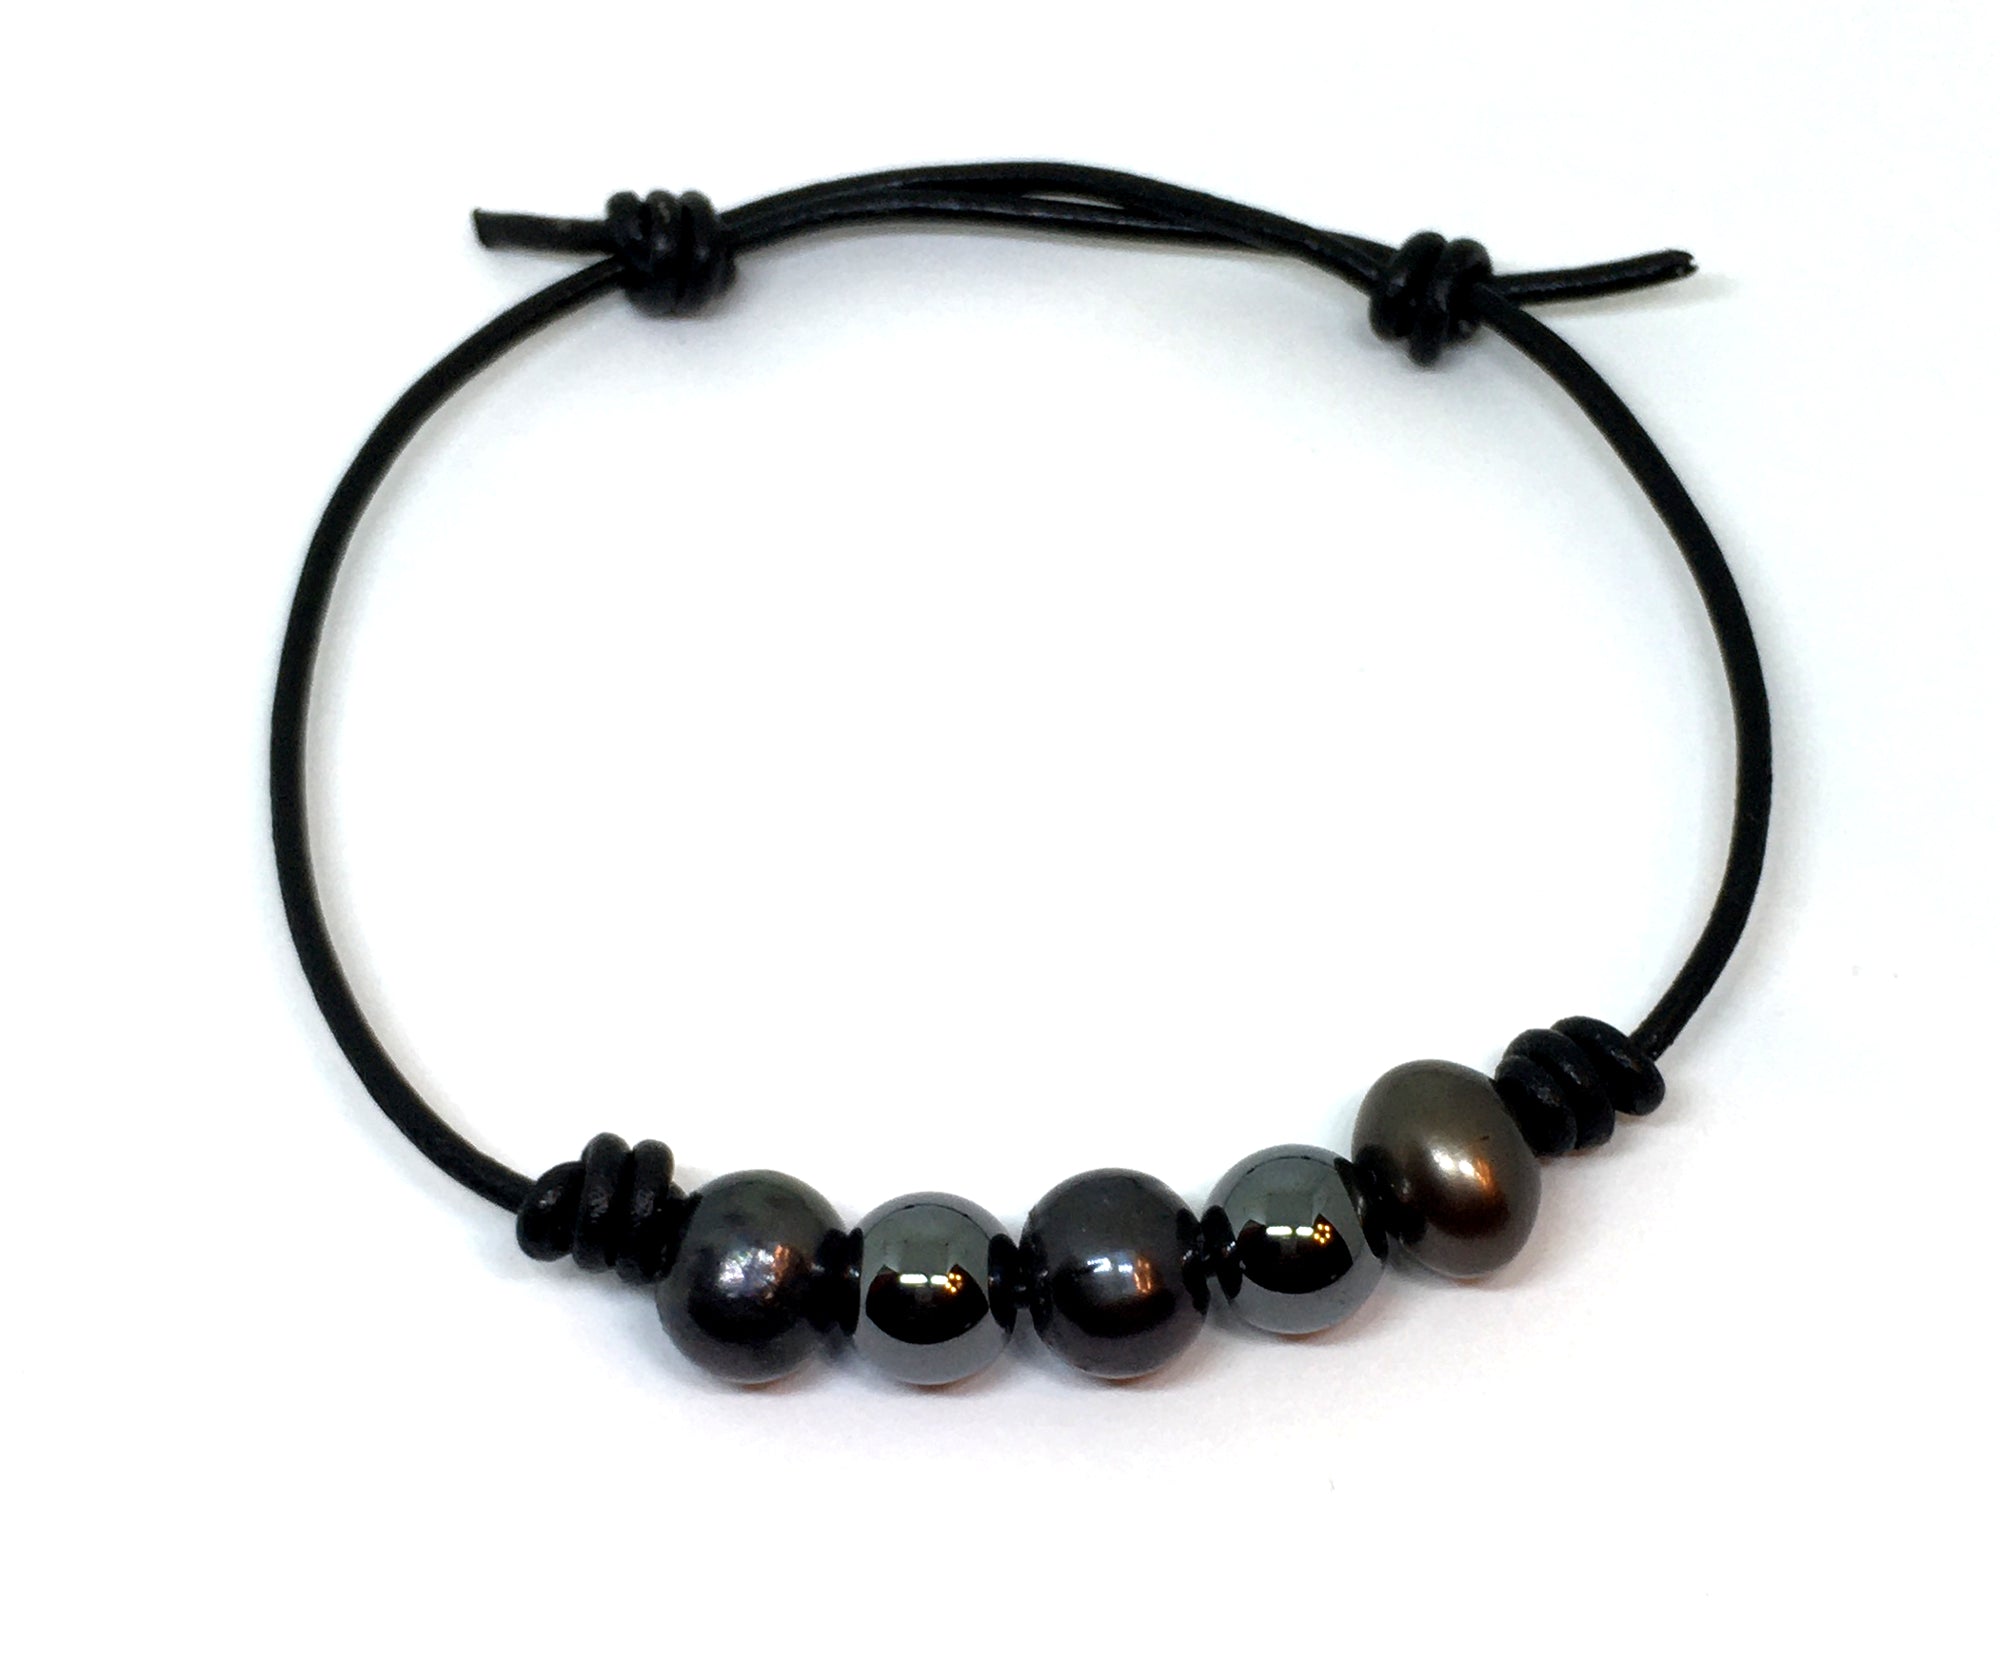 Black Pearl and Hematite Knotted Black Leather Bracelet for Men and Women